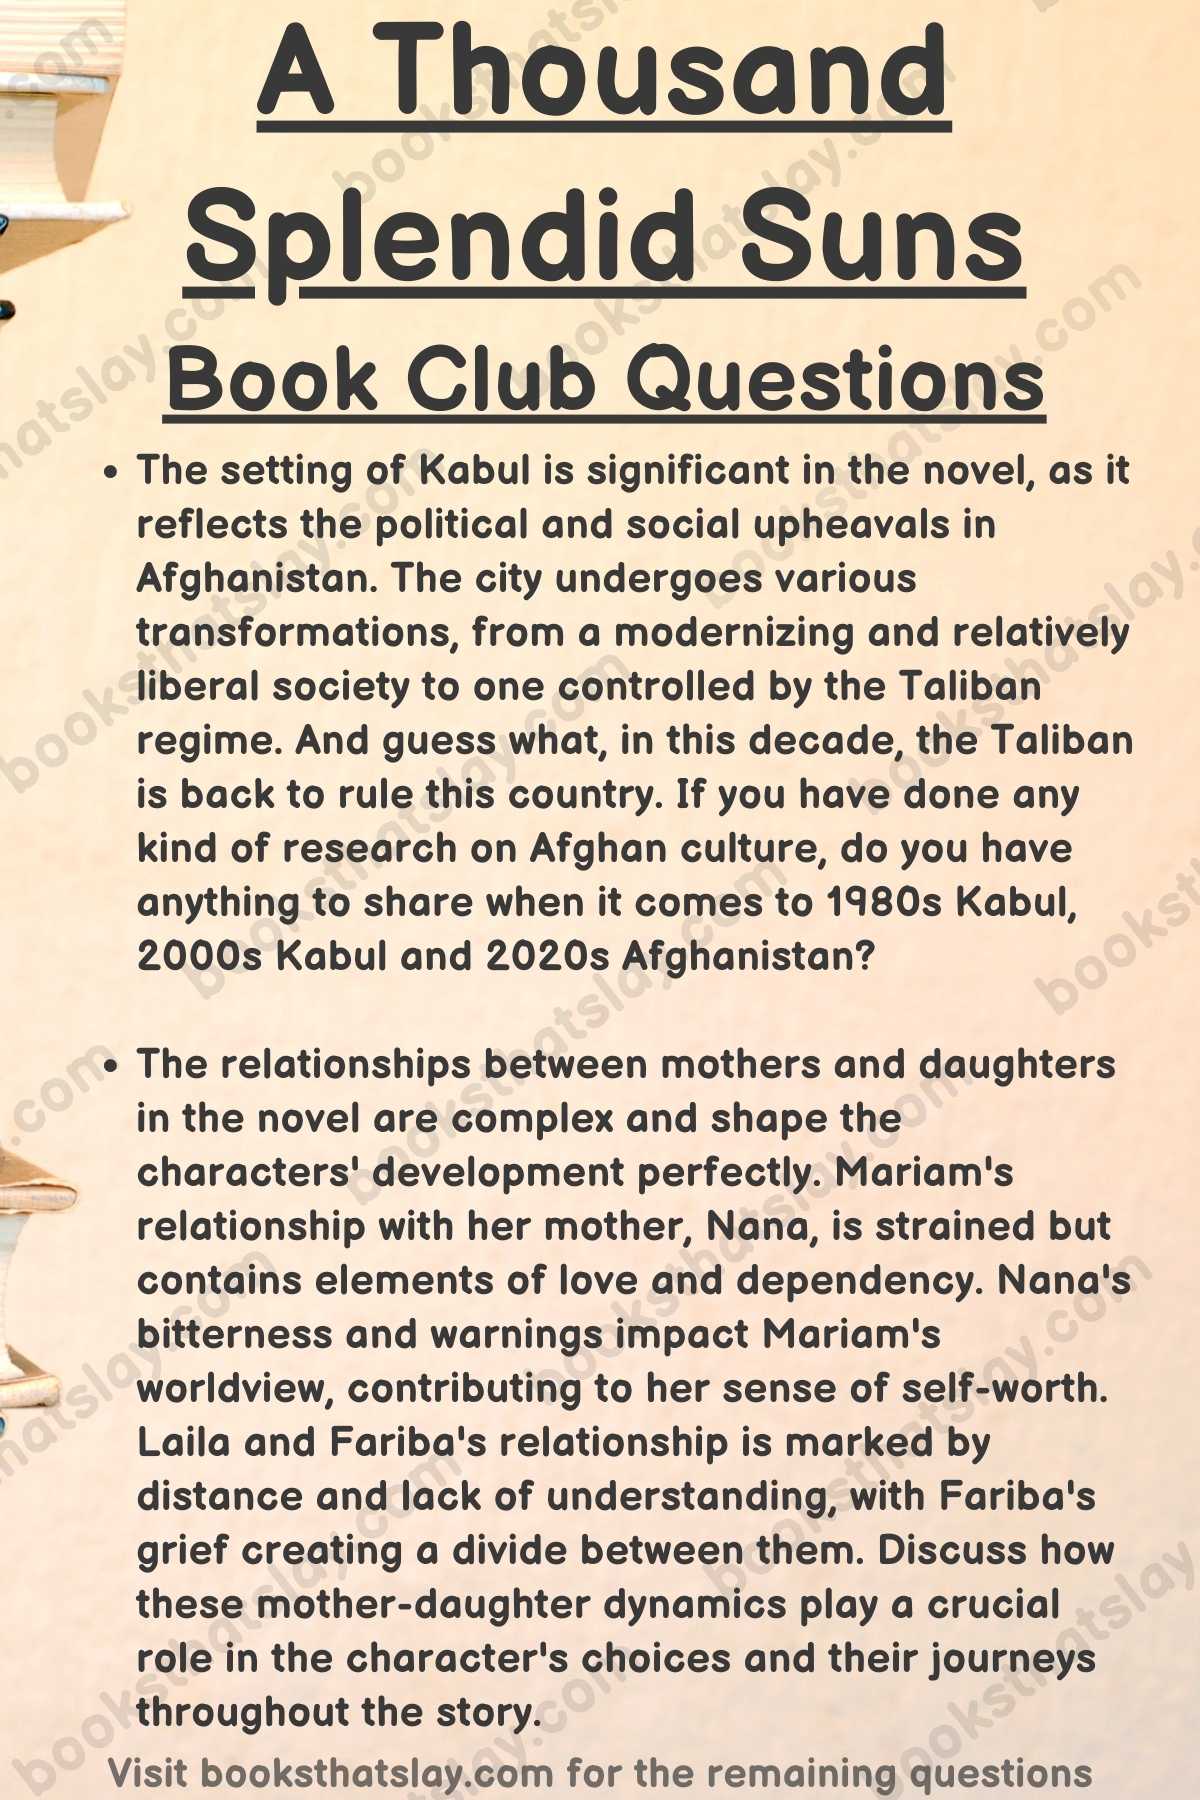 A Thousand Splendid Suns Book Club Questions Infographic